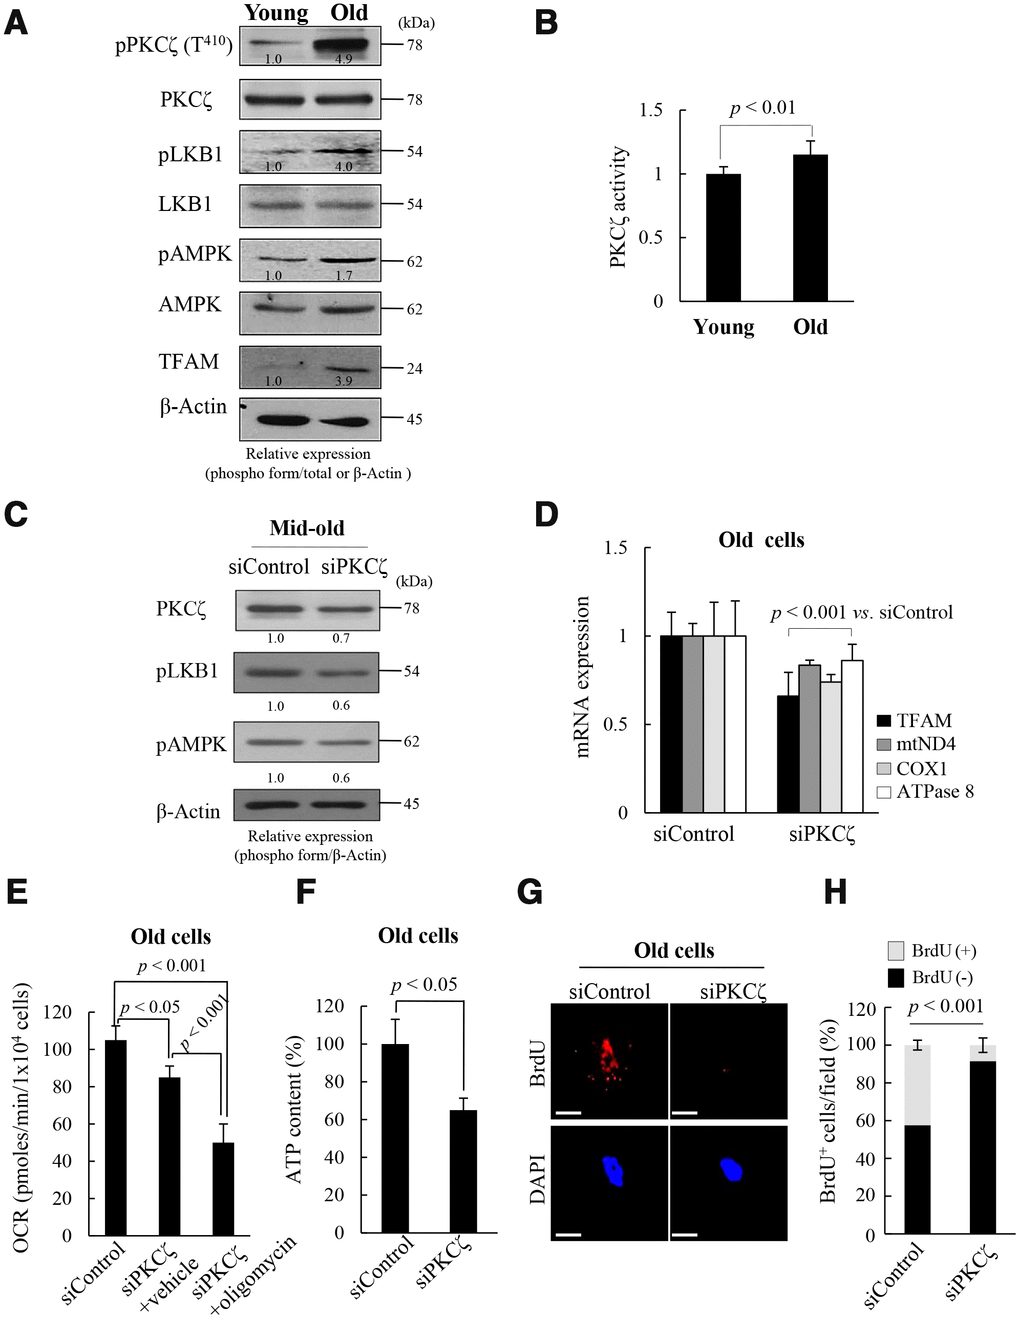 Protein kinase C zeta (PKCζ) regulates mitochondrial reprogramming in old fs-HDF cells. (A) Immunoblot of PKCζ, LKB1, AMPK, and TFAM in young and old cells. (B) PKCζ was purified from young and old cells by immunoprecipitation (IP) and subjected to in vitro kinase assay using a PKC kit. (C) Mid-old fs-HDF cells were transfected with siRNAs-PKCζ and subjected to immunoblot analysis. Band intensity was quantified using ImageJ software and normalized to β-actin. (D) Old fs-HDF cells transfected with siPKCζ were subjected to RT-qPCR to measure the expression of TFAM and the mitochondrial complex-I (ND4), -IV (COX1), and -V (ATPase8) subunits. Data were normalized to the siControl-transfected cells. (E) Old fs-HDF cells transfected with siPKCζ were treated with or without oligomycin (10 μM) for 1 h and the oxygen consumption rate (OCR; pmol/min/1 × 104 cells) was compared to that of siControl-transfected cells. Note significant inhibition of OCR by knockdown of PKCζ expression. It was more downregulated by oligomycin cotreatment. (F) ATP levels in old cells transfected with siPKCζ. (G) BrdU incorporation in old cells transfected with siControl or siPKCζ. Nuclei were stained with DAPI (blue). Scale bars, 10 μm. (H) BrdU incorporation in mitochondria was quantified. Confocal microscope images were captured and counted at least 200 cells using ImageJ software (n=10 images/group). Data are means ± SD of two independent experiments per group. Student’s t-test or one-way ANOVA followed by Tukey HSD post hoc test.